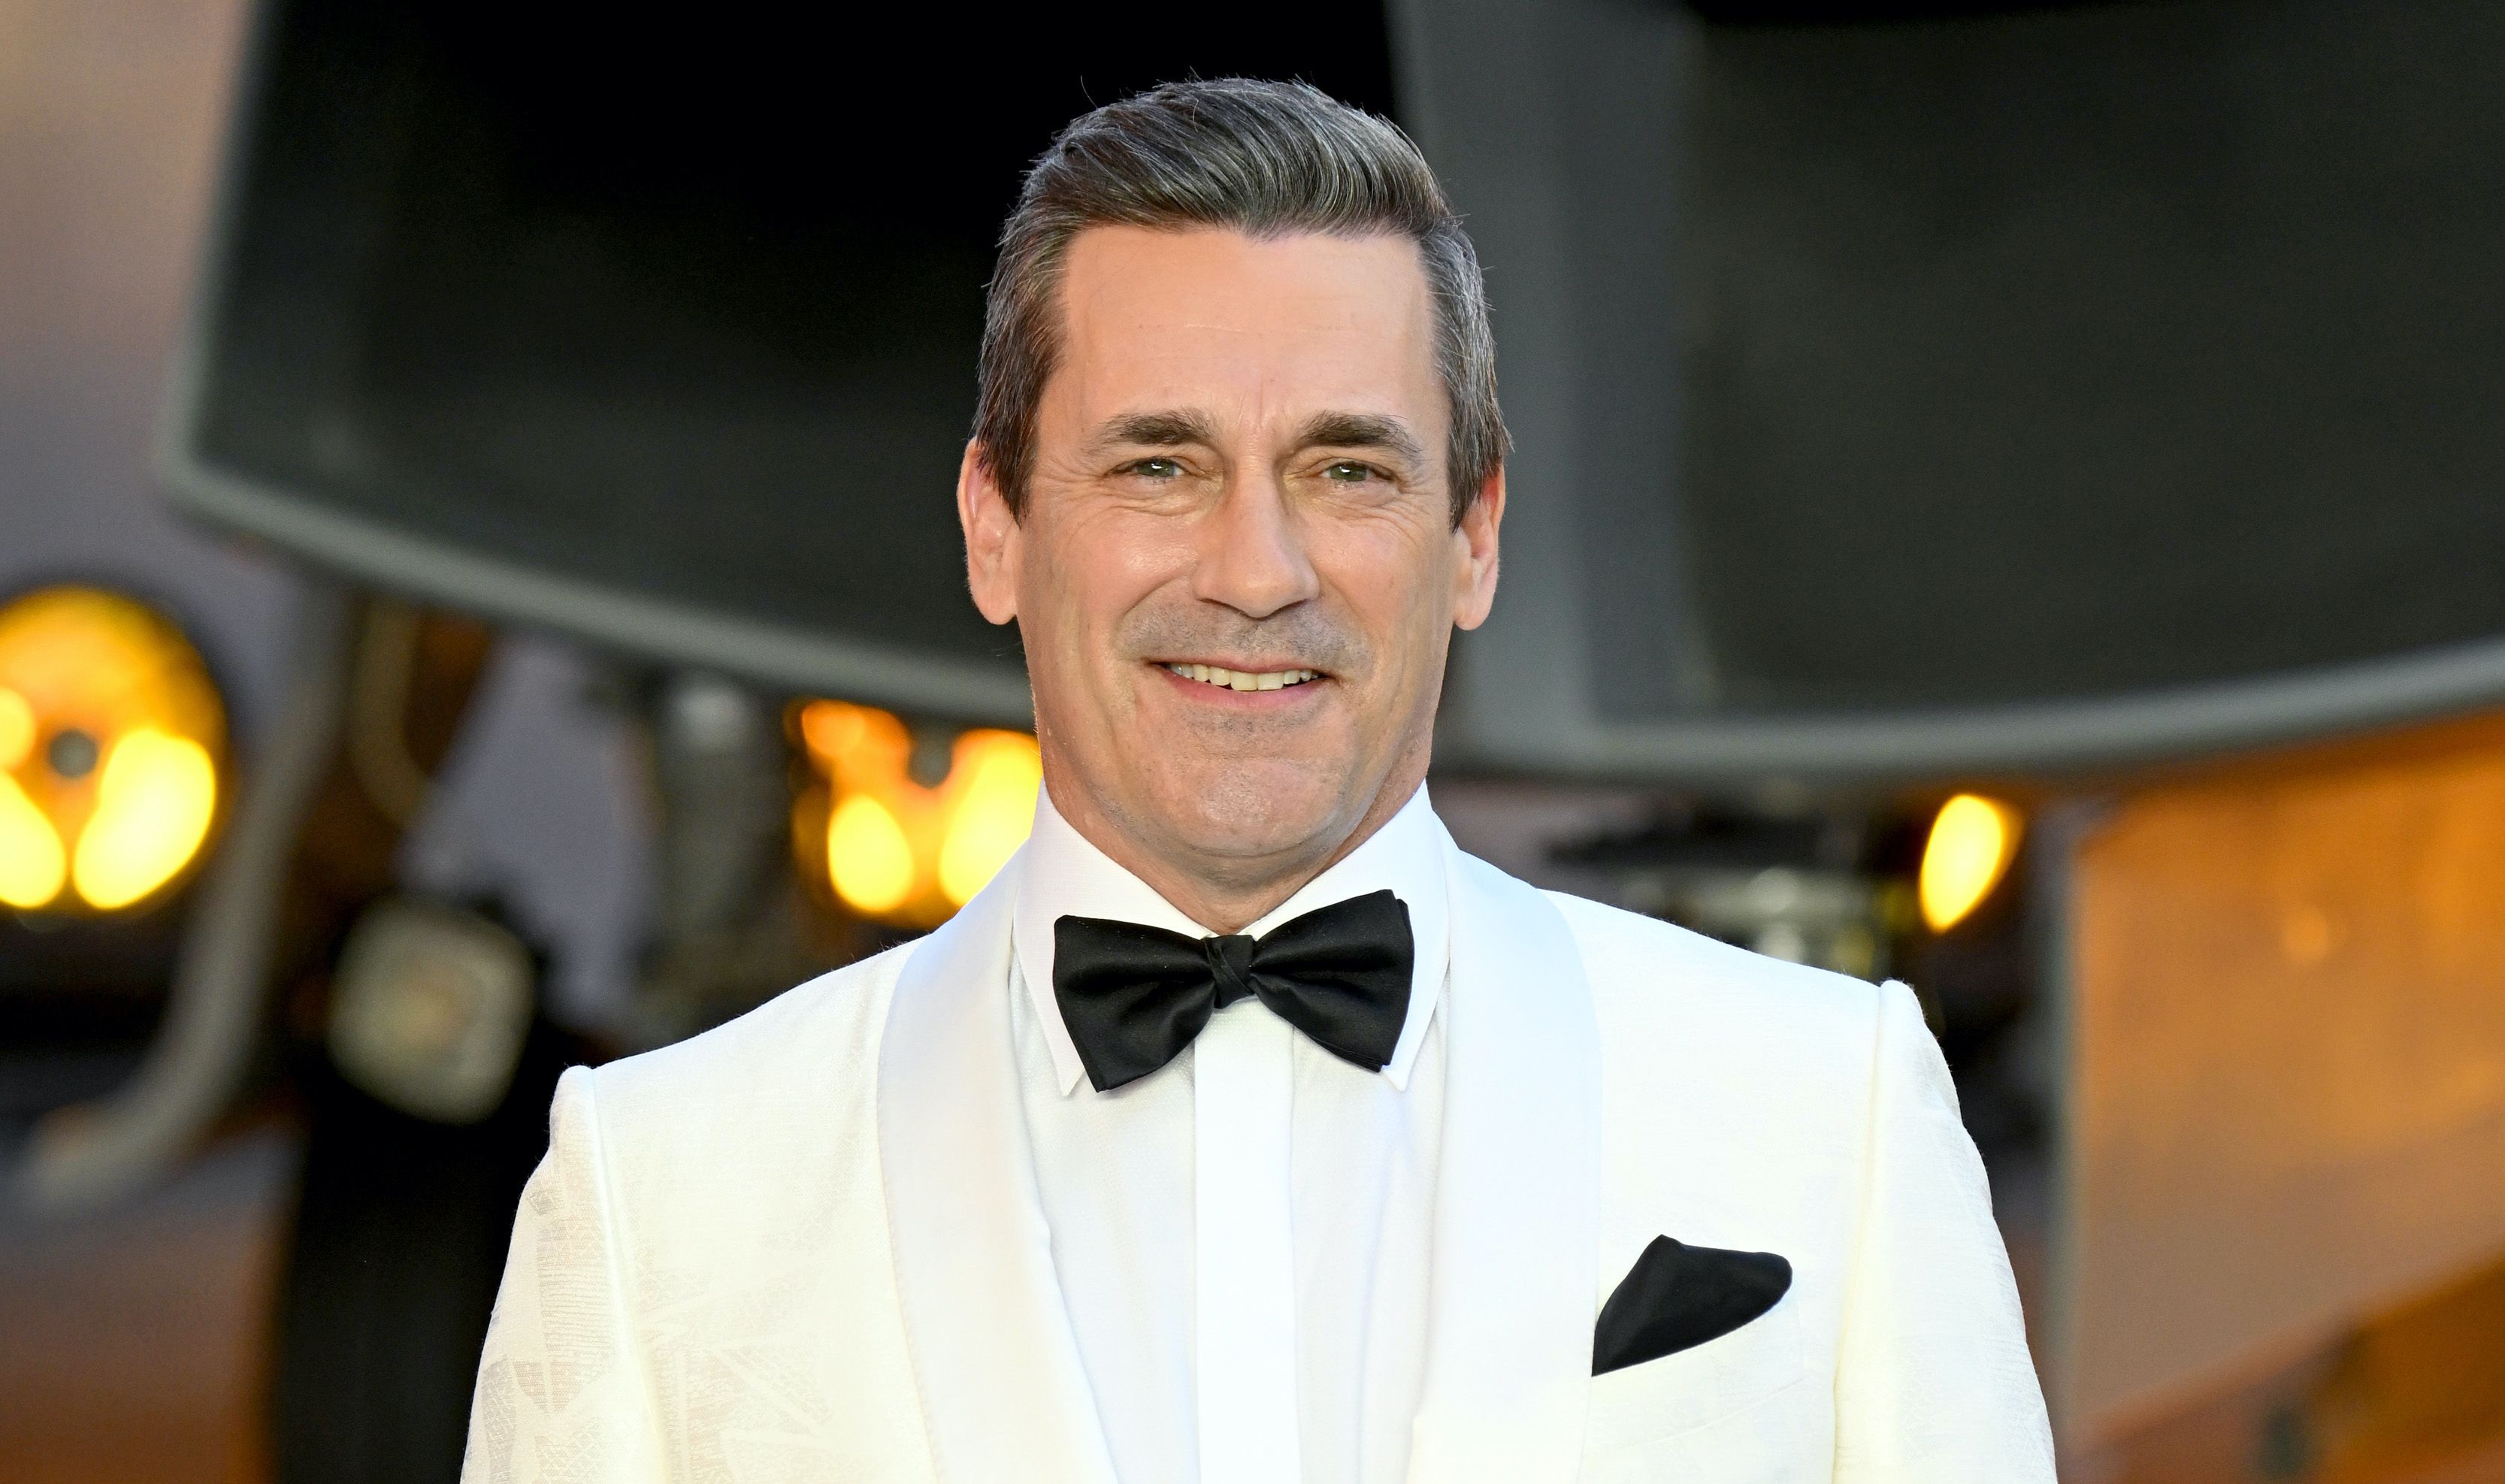 Jon Hamm on Top Gun Maverick, Shirtless Scenes and the Complicated Business of Being Objectified